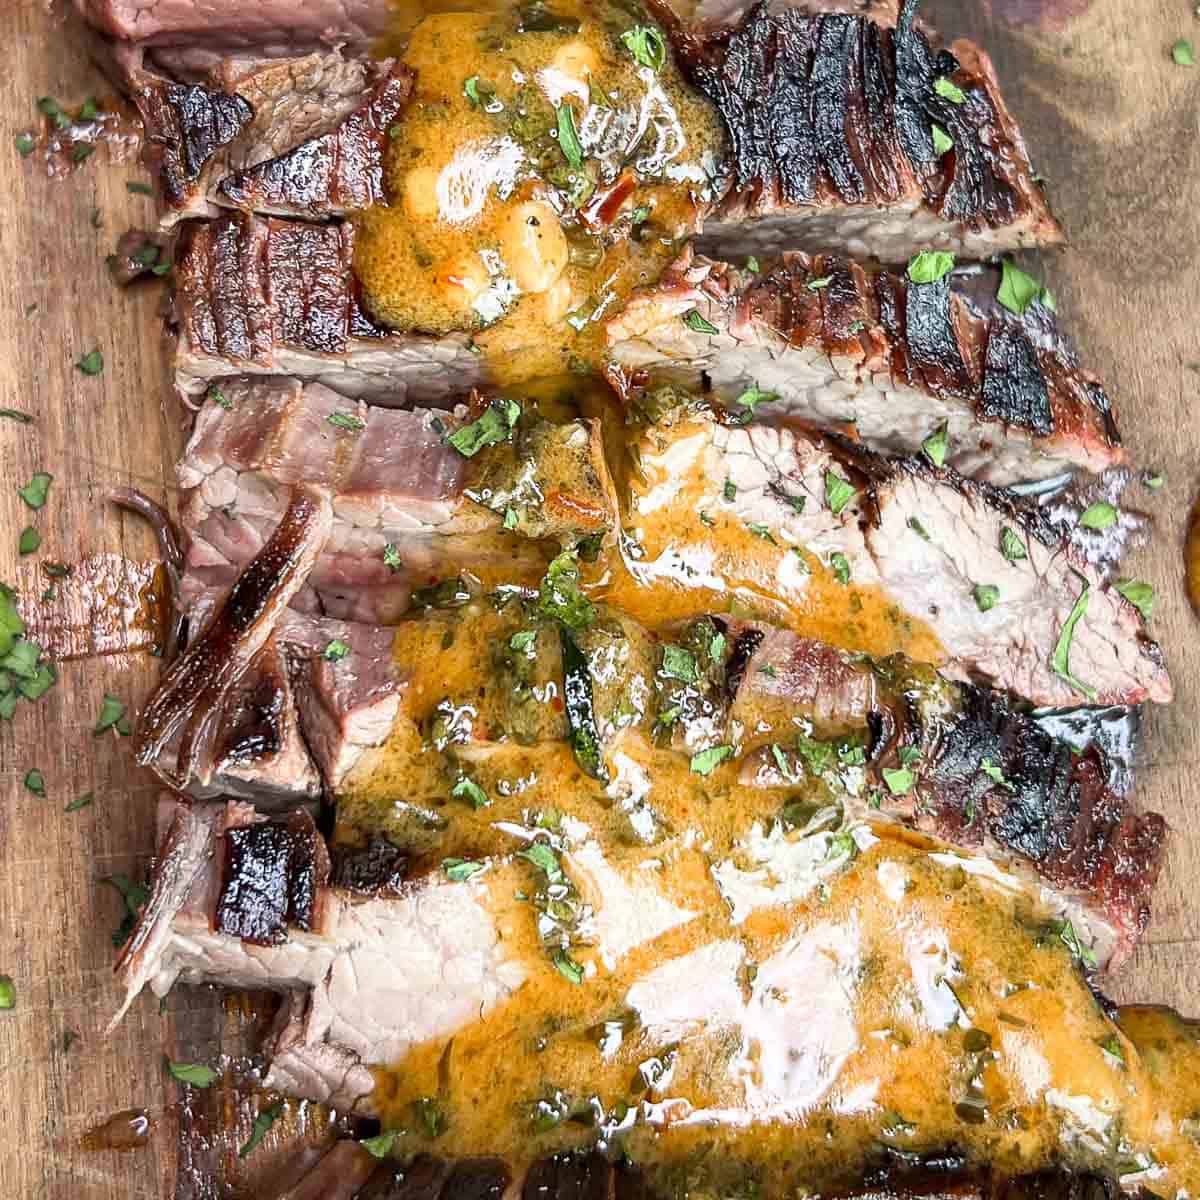 Sliced Grilled Ribeye Steak drizzled with warm Cowboy Butter Sauce and garnished with fresh herbs.